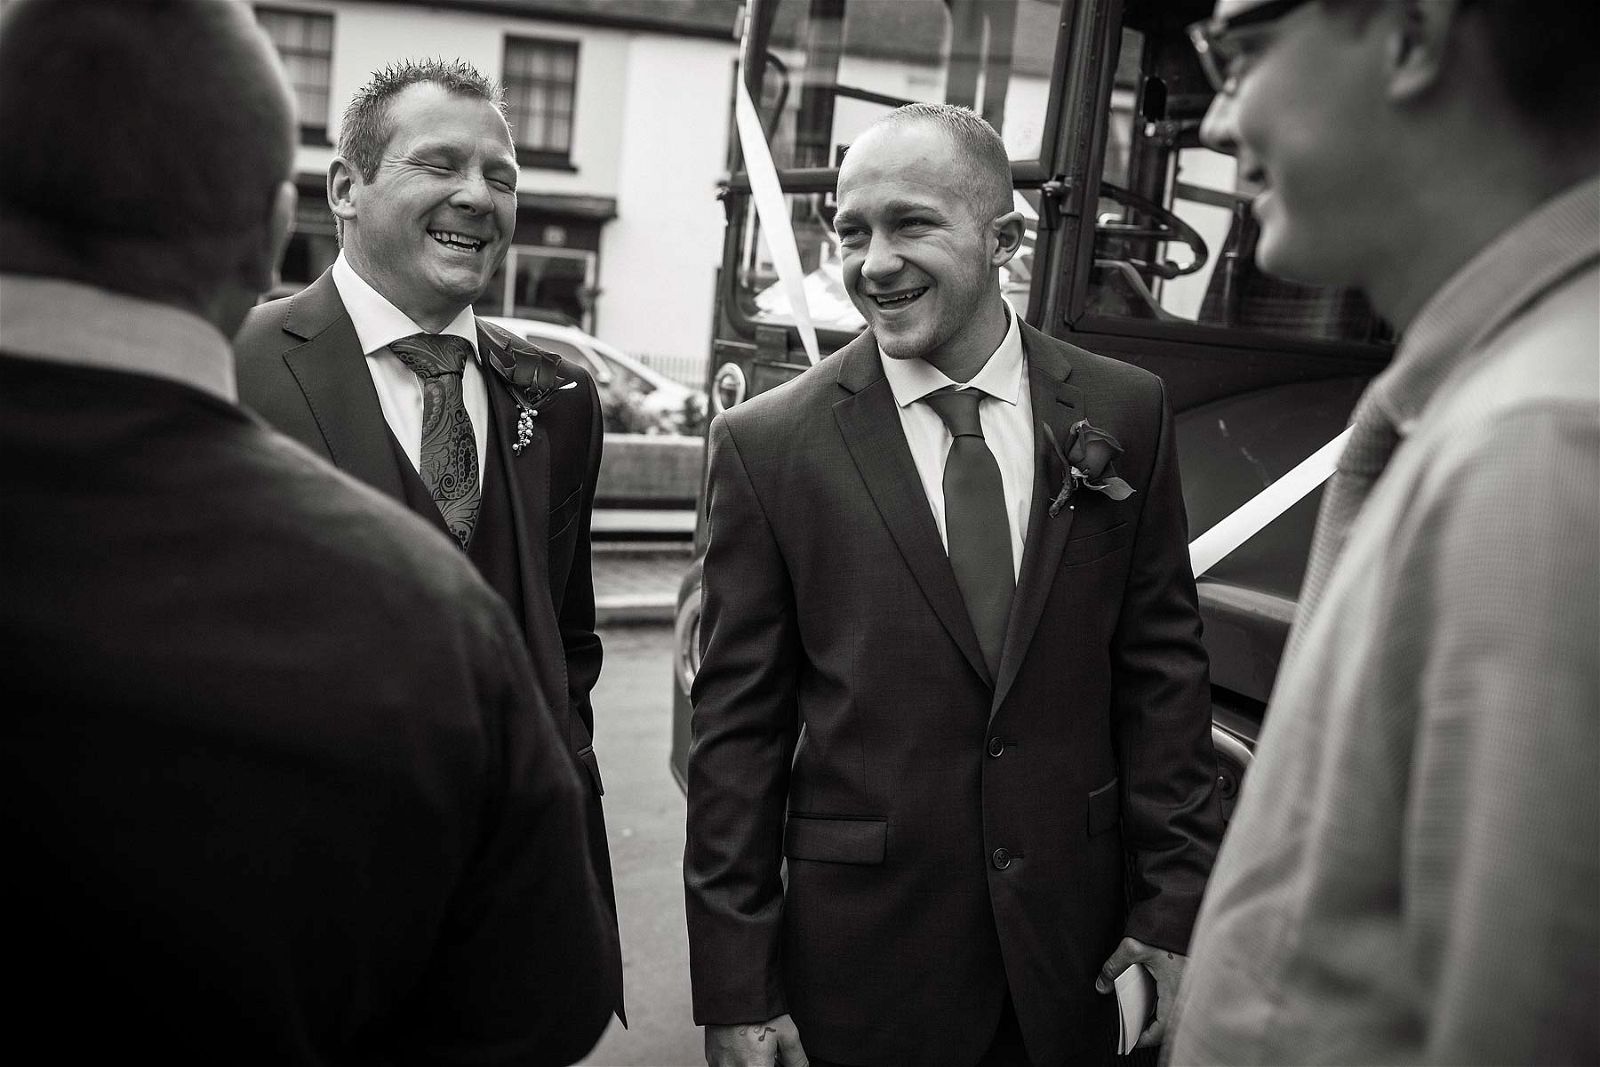 Candid natural storytelling wedding photography at The Lion Hotel in Brewood by Documentary Wedding Photographer Stuart James